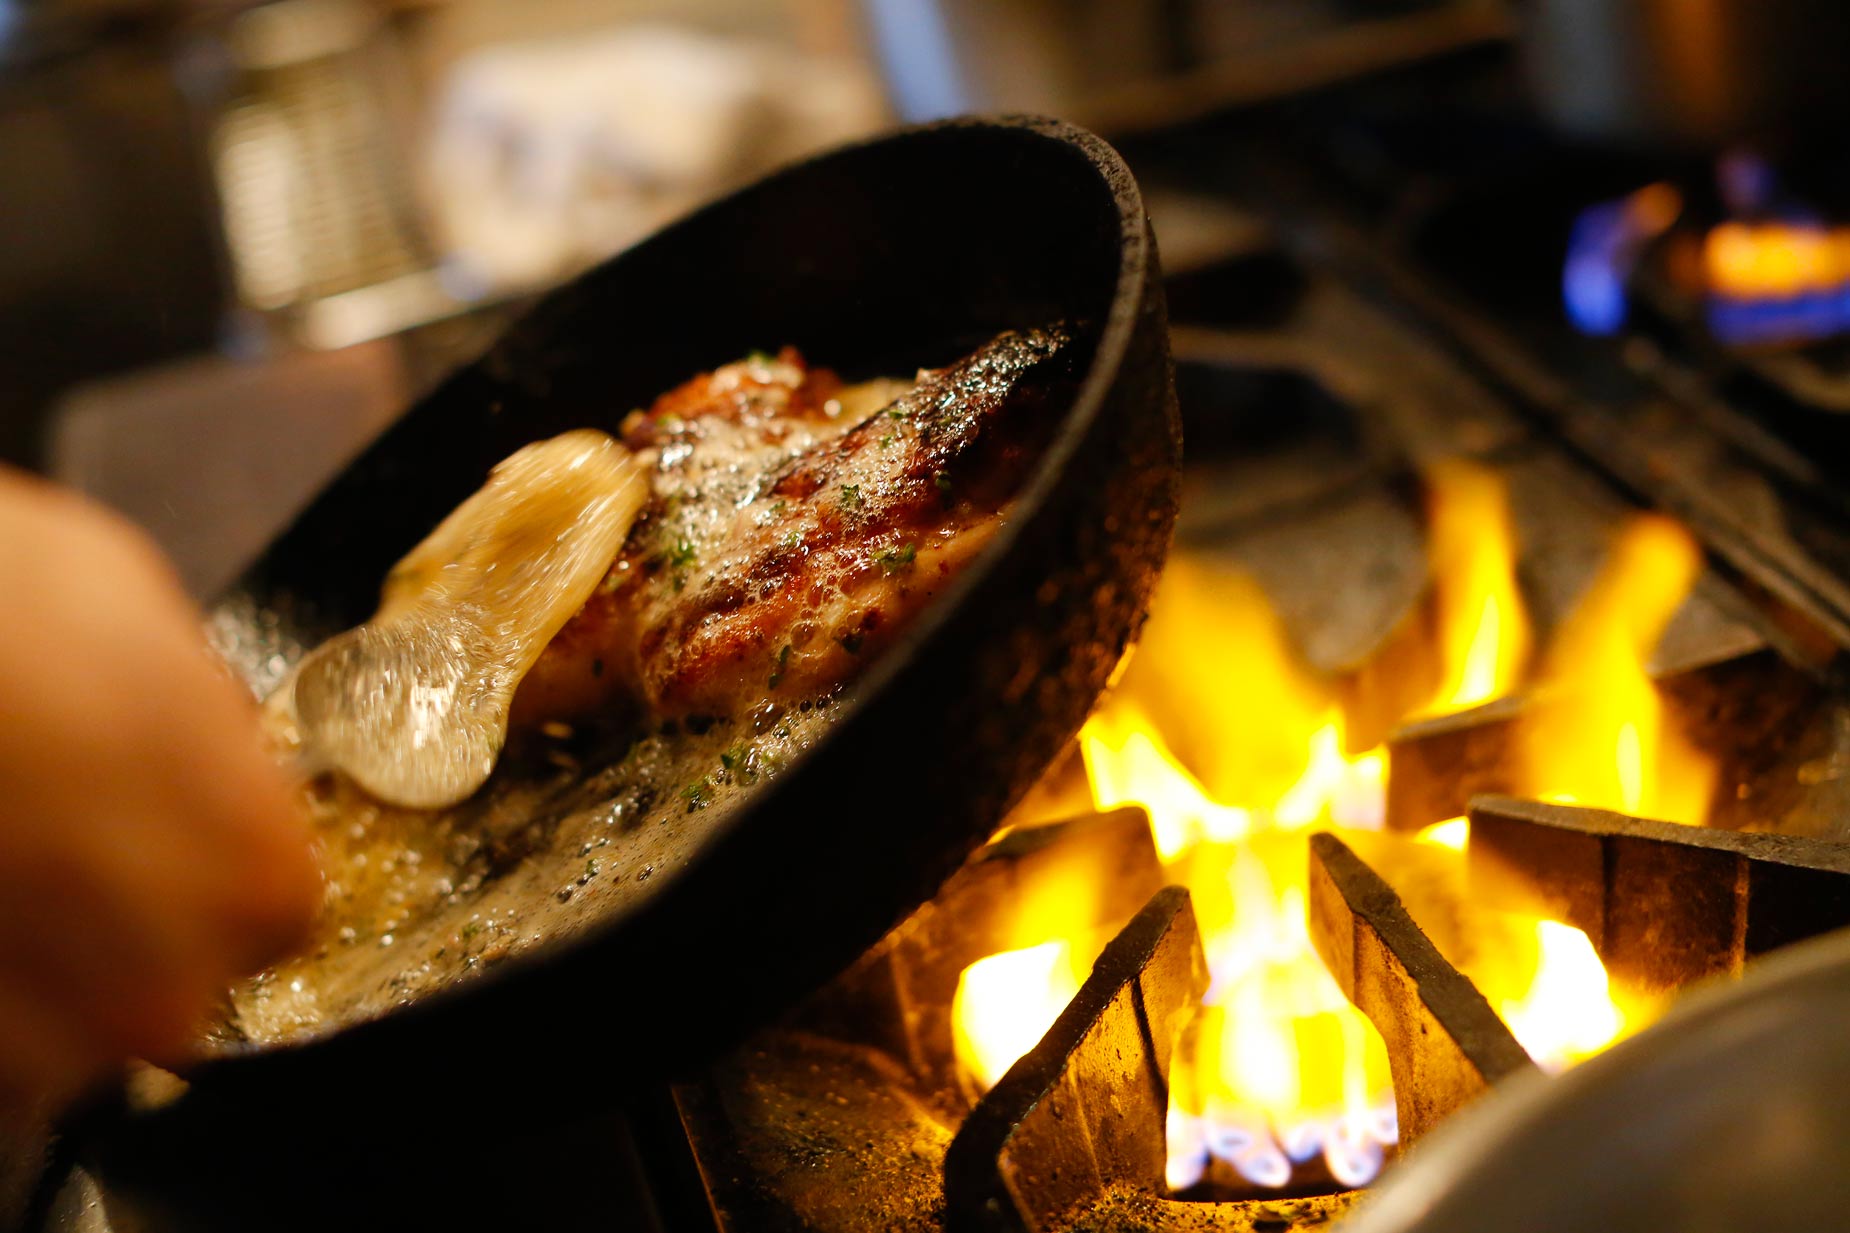 A pan in motion cooks on open flame in restaurant